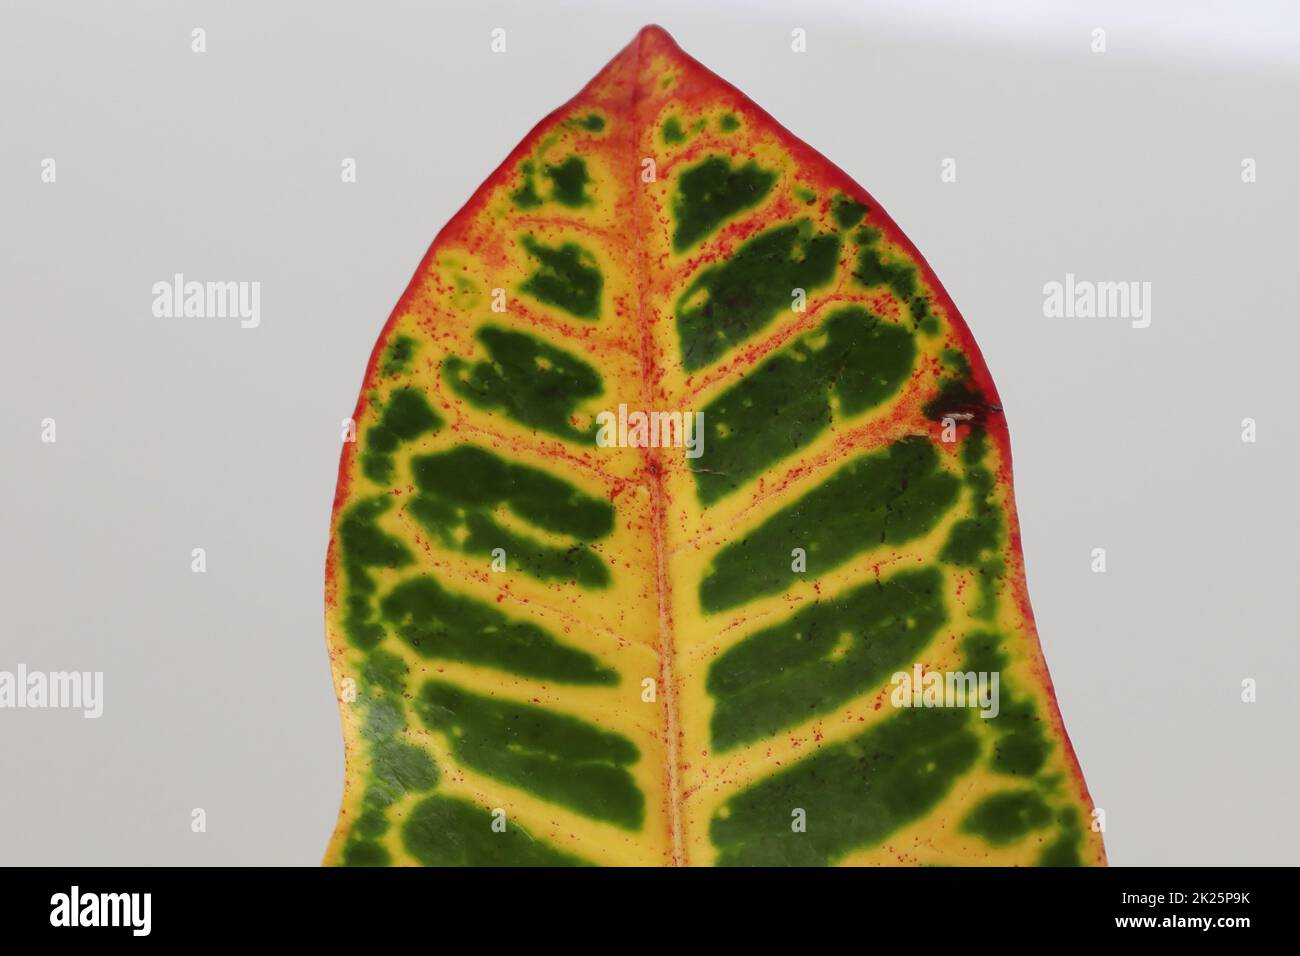 The leaf tip on a Croton plant with multiple colors Stock Photo